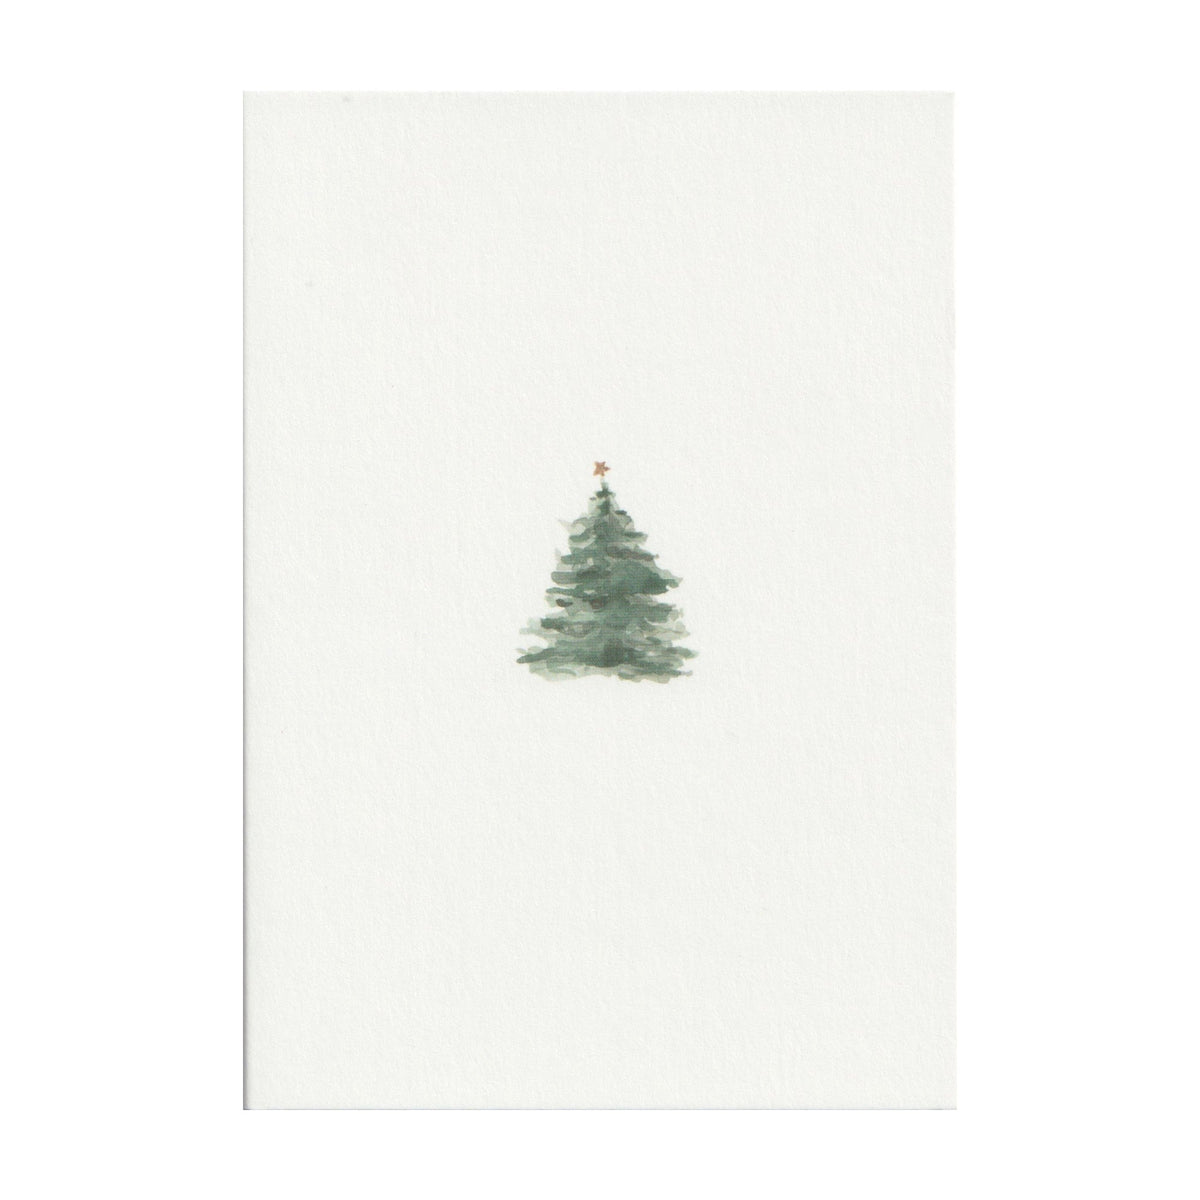 Luxury Christmas Card by Memo Press with a watercolour illustration of a traditional Christmas Tree with a single star on top and comes with a nubuck brown envelope made in Britain